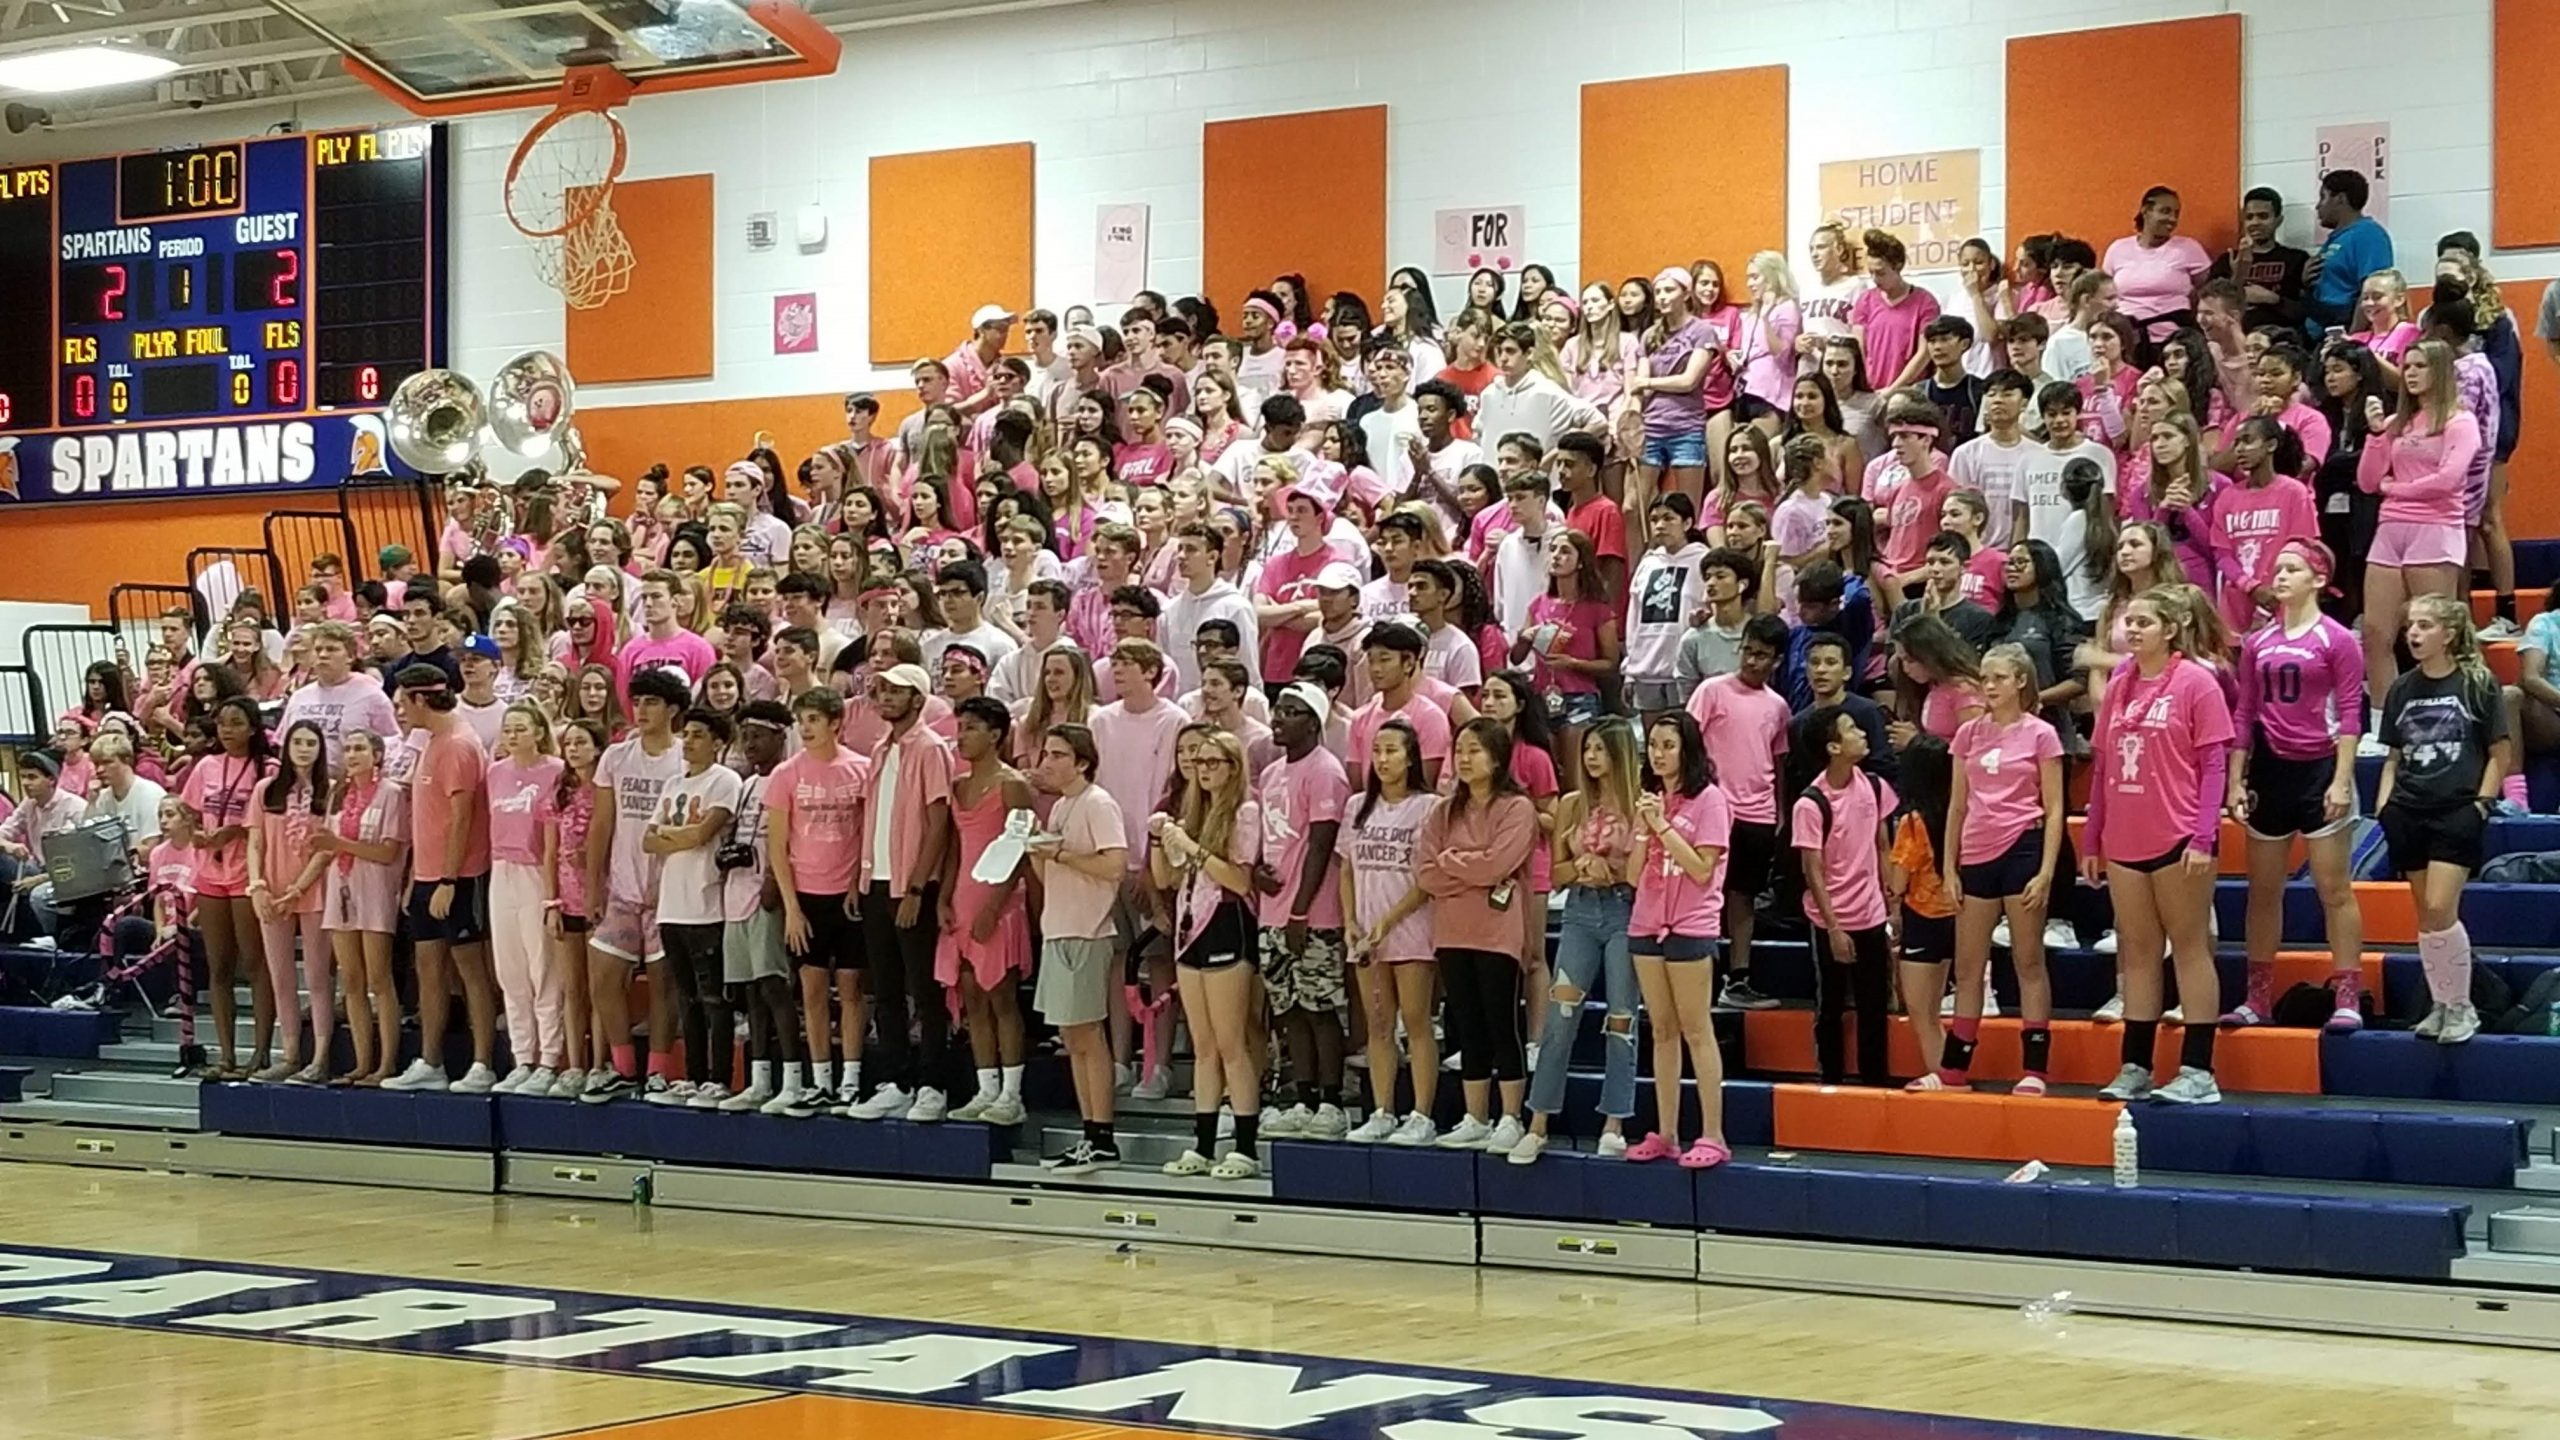 Fan section at West Springfield High School